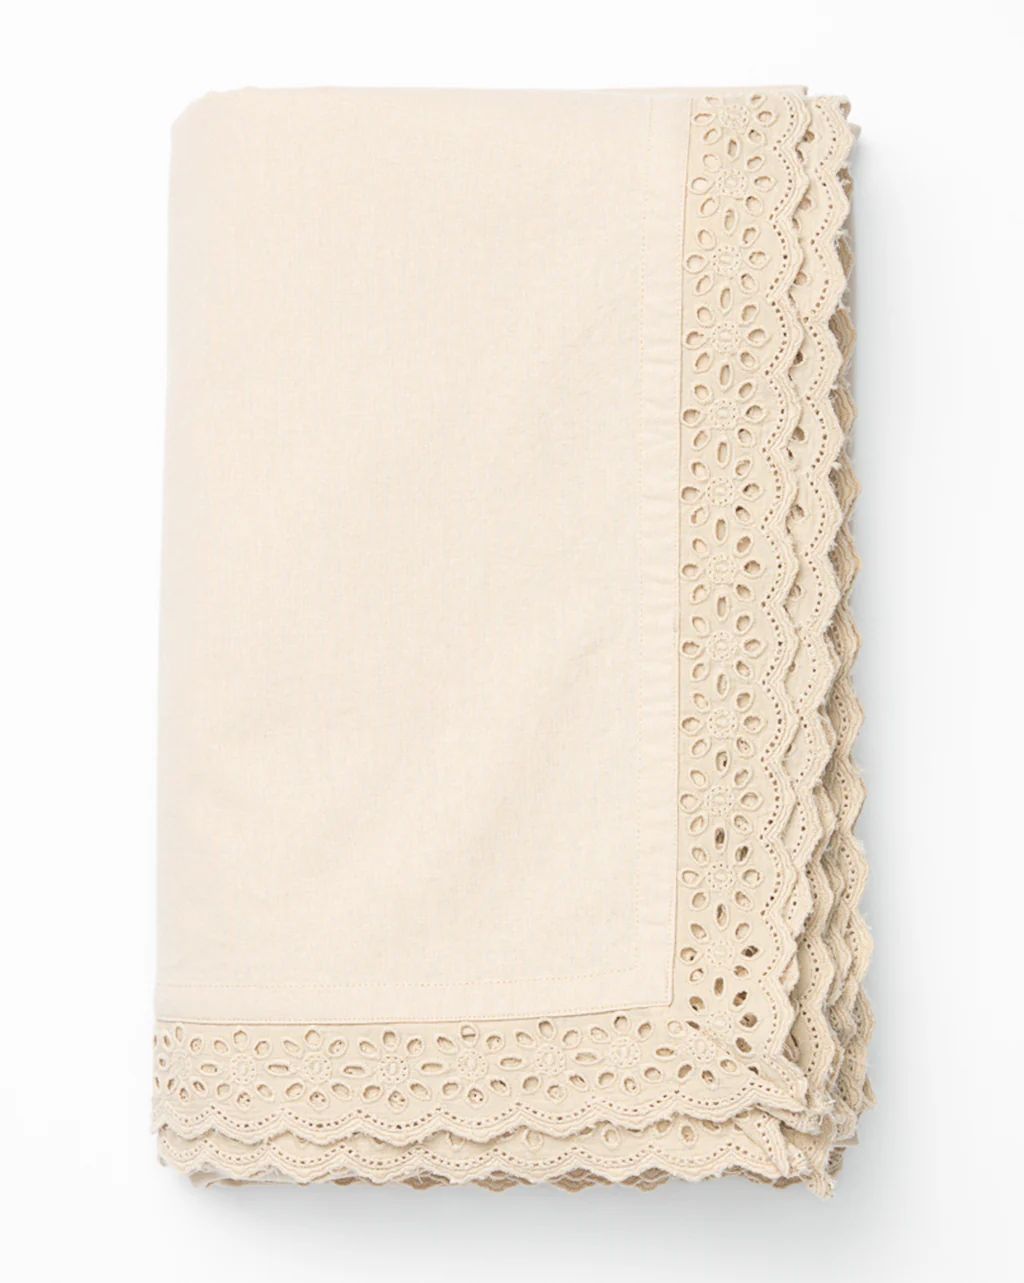 Coming Soon: Eyelet Tablecloth | McGee & Co.